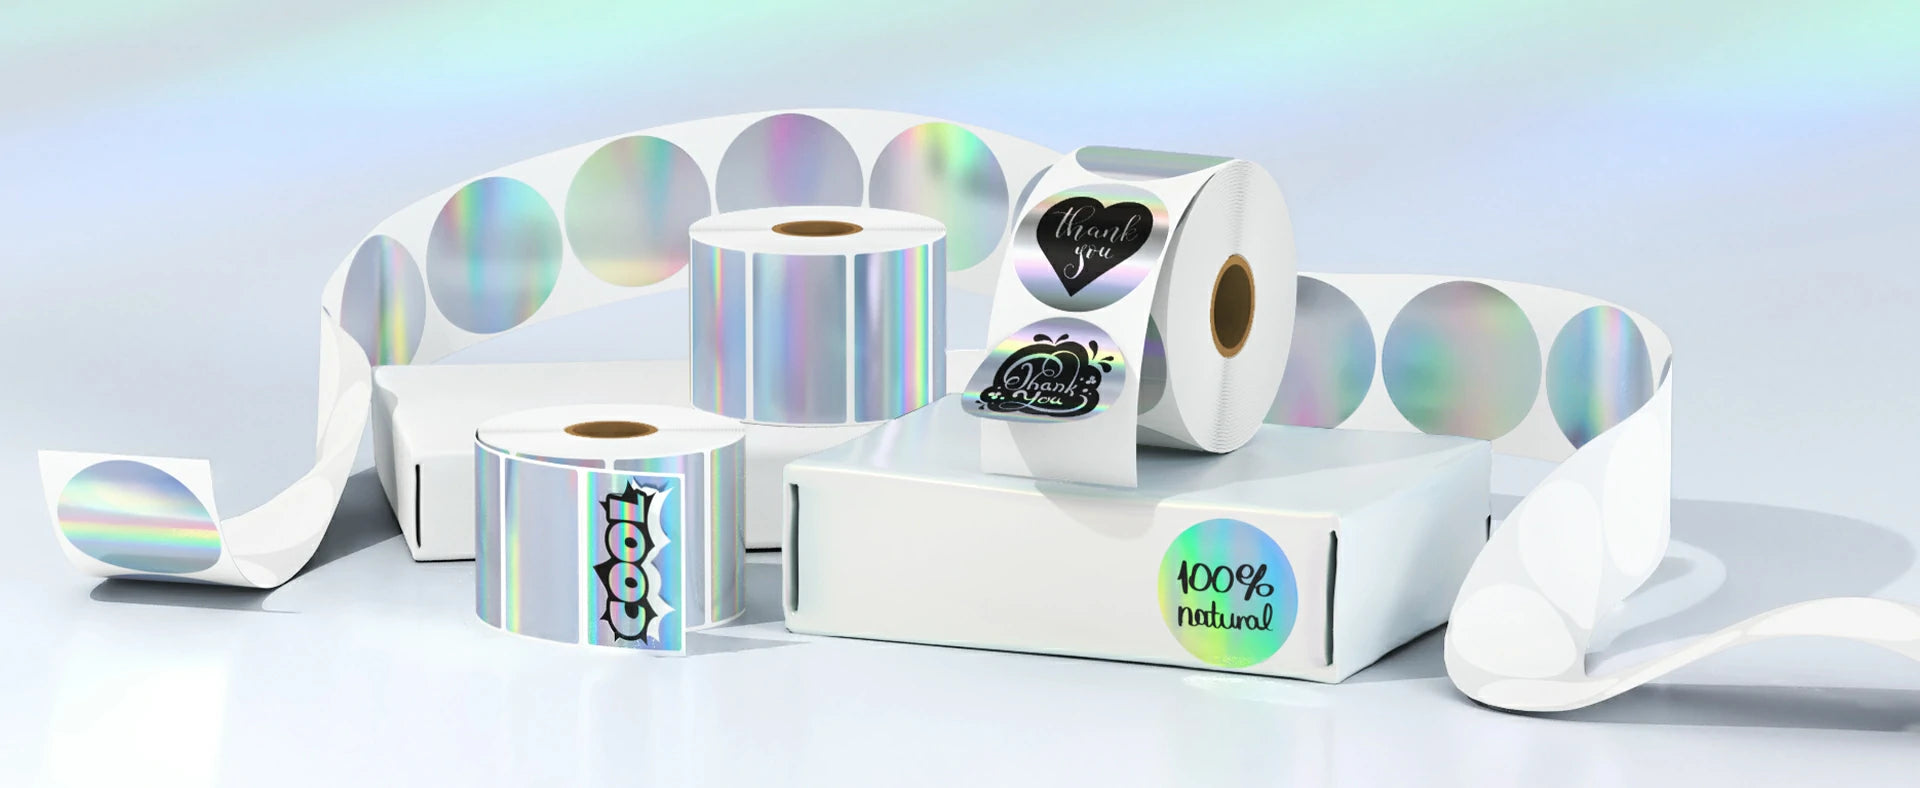 MUNBYN provides two types of holographic thermal labels, which are available in both circular and rectangular shapes.